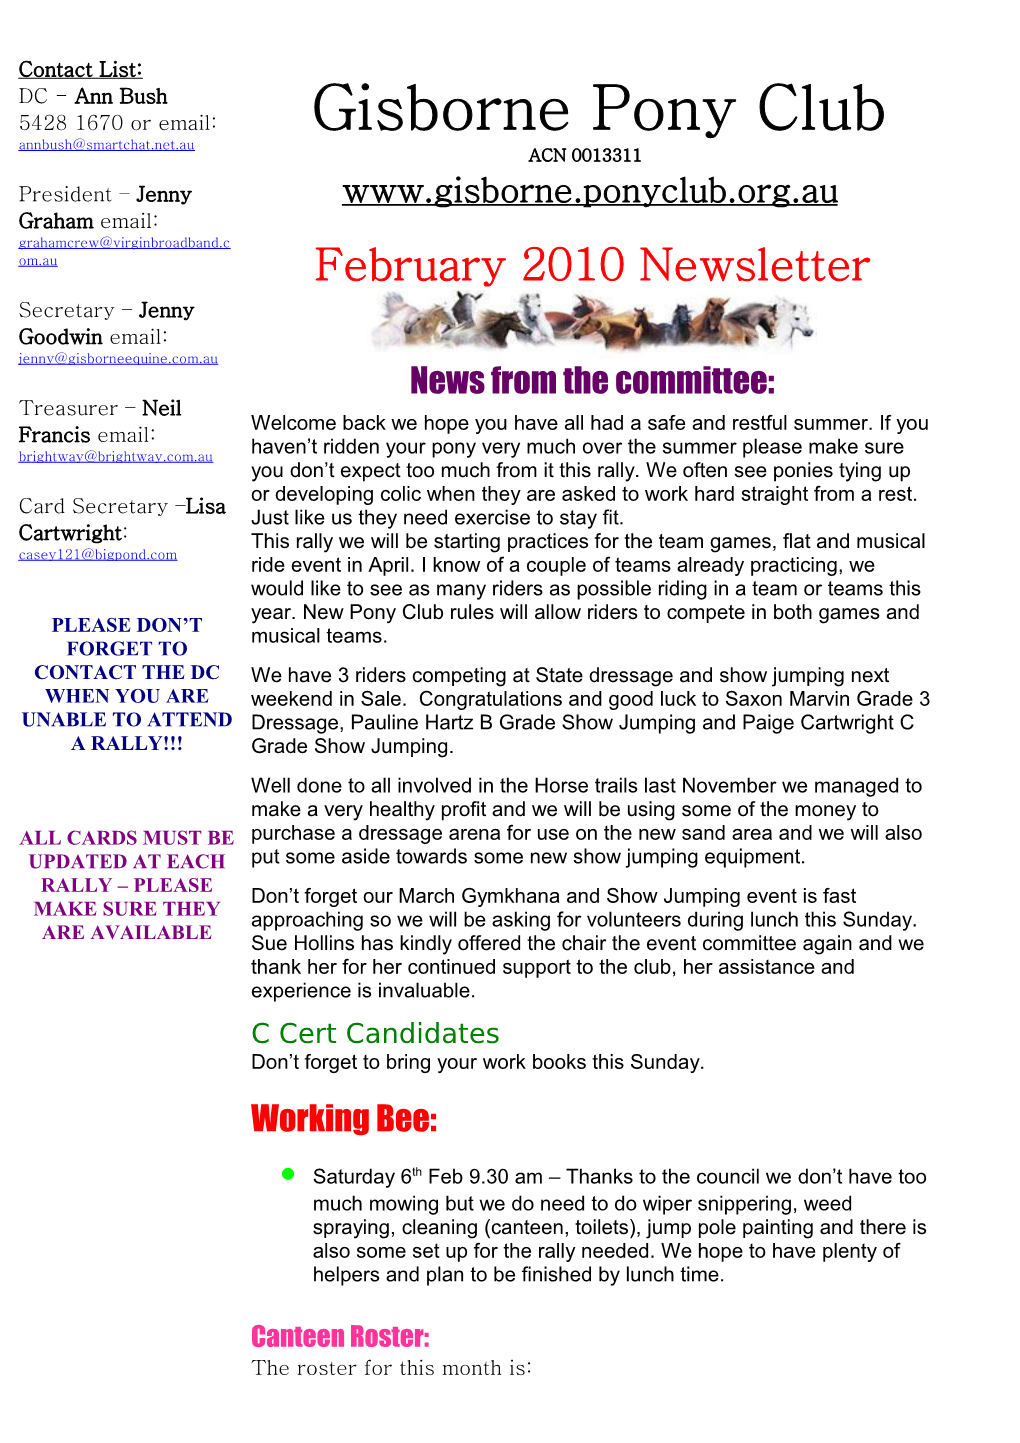 News from the Committee